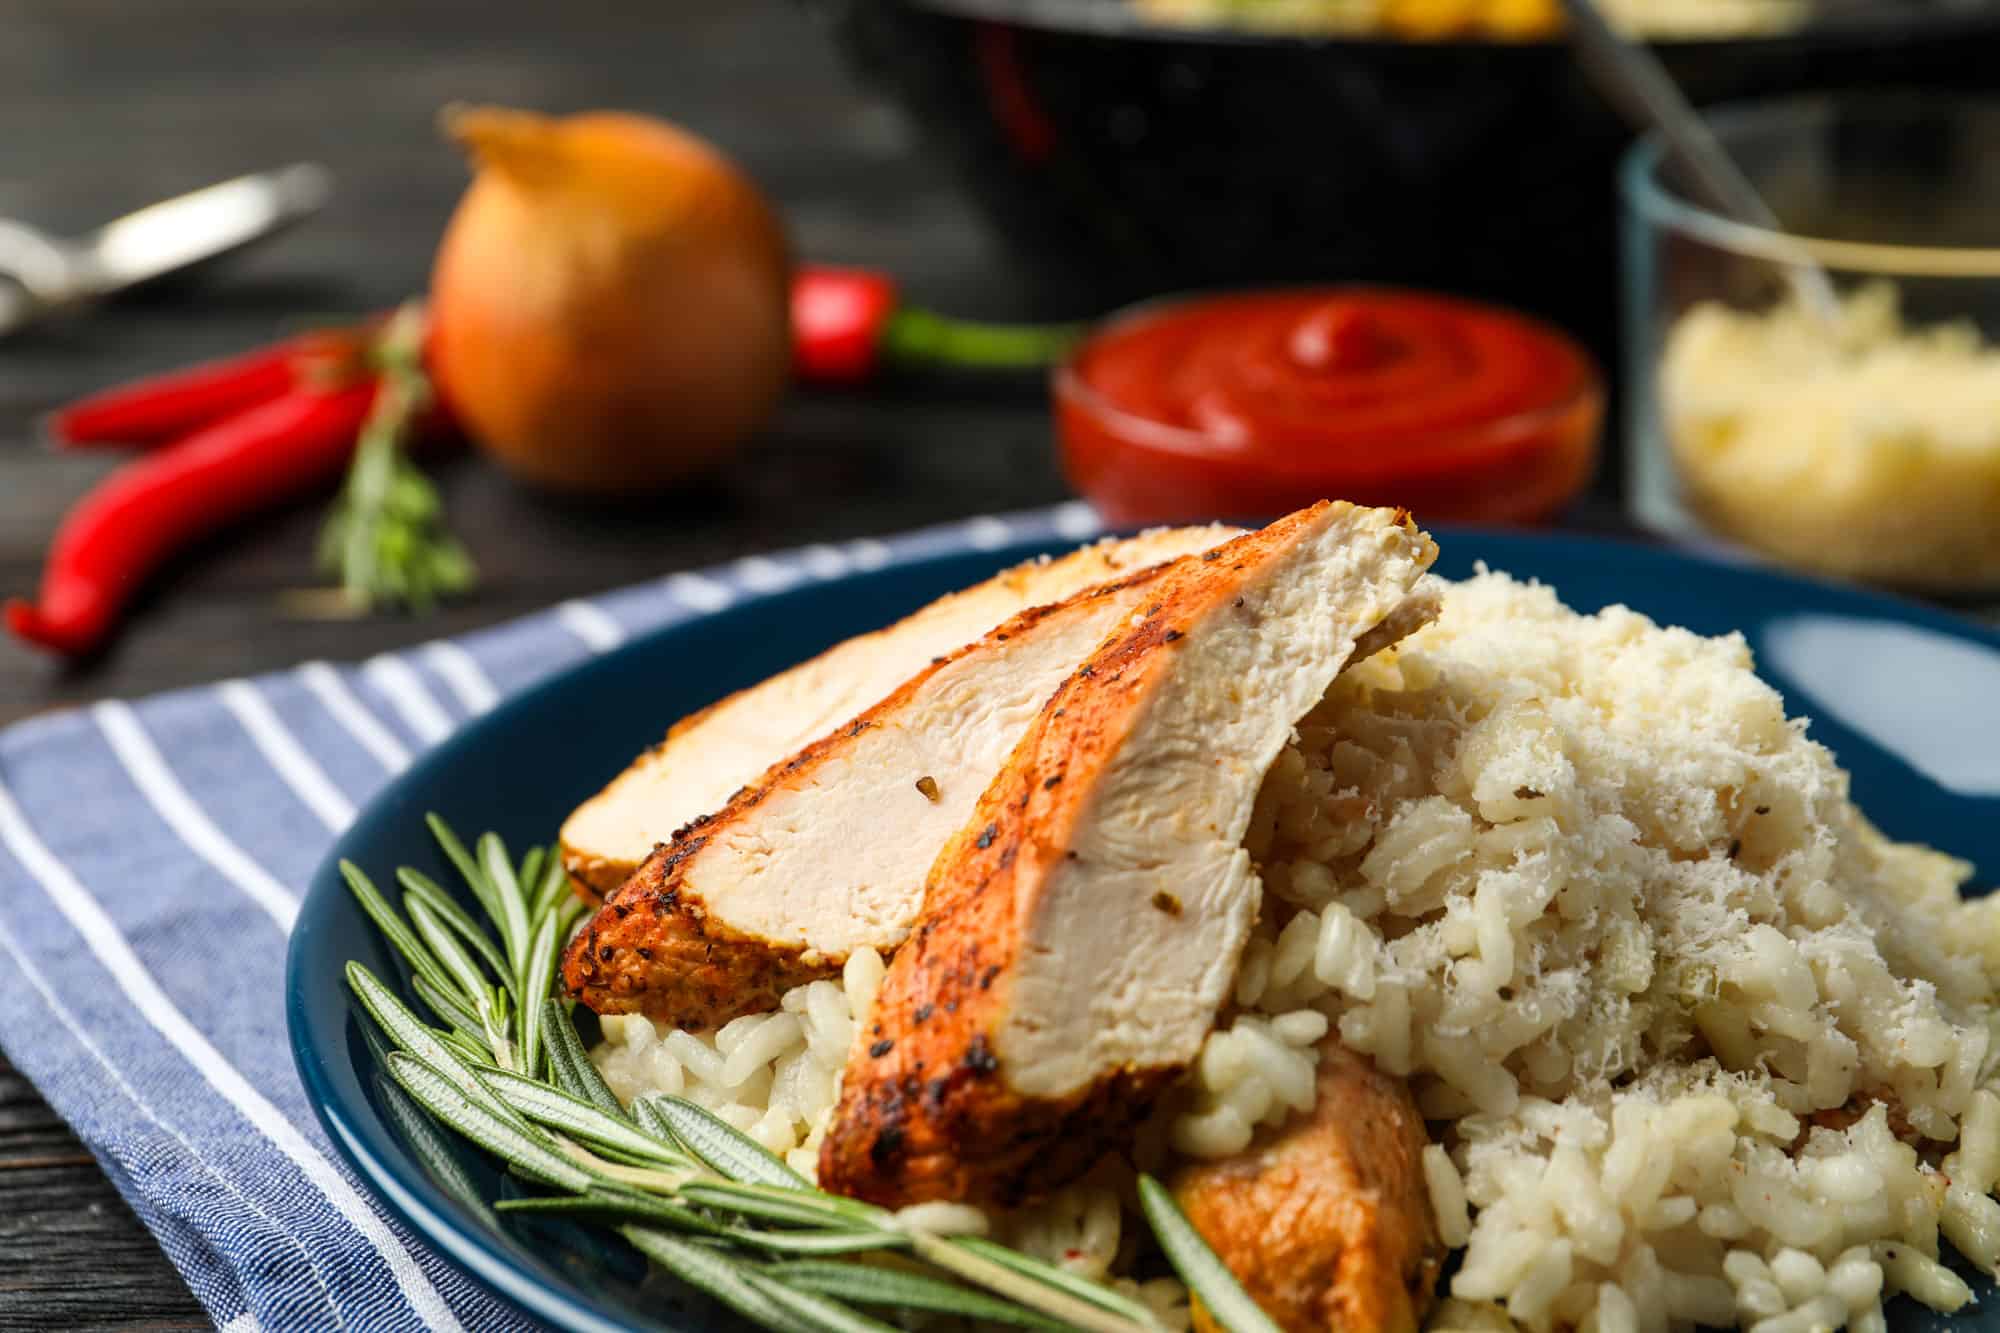 Turkey-Breast-Braised-with-Garlic-and-Rice-2, food, kitchen, table, chicken, cooking, meat, rice, healthy, plate, natural